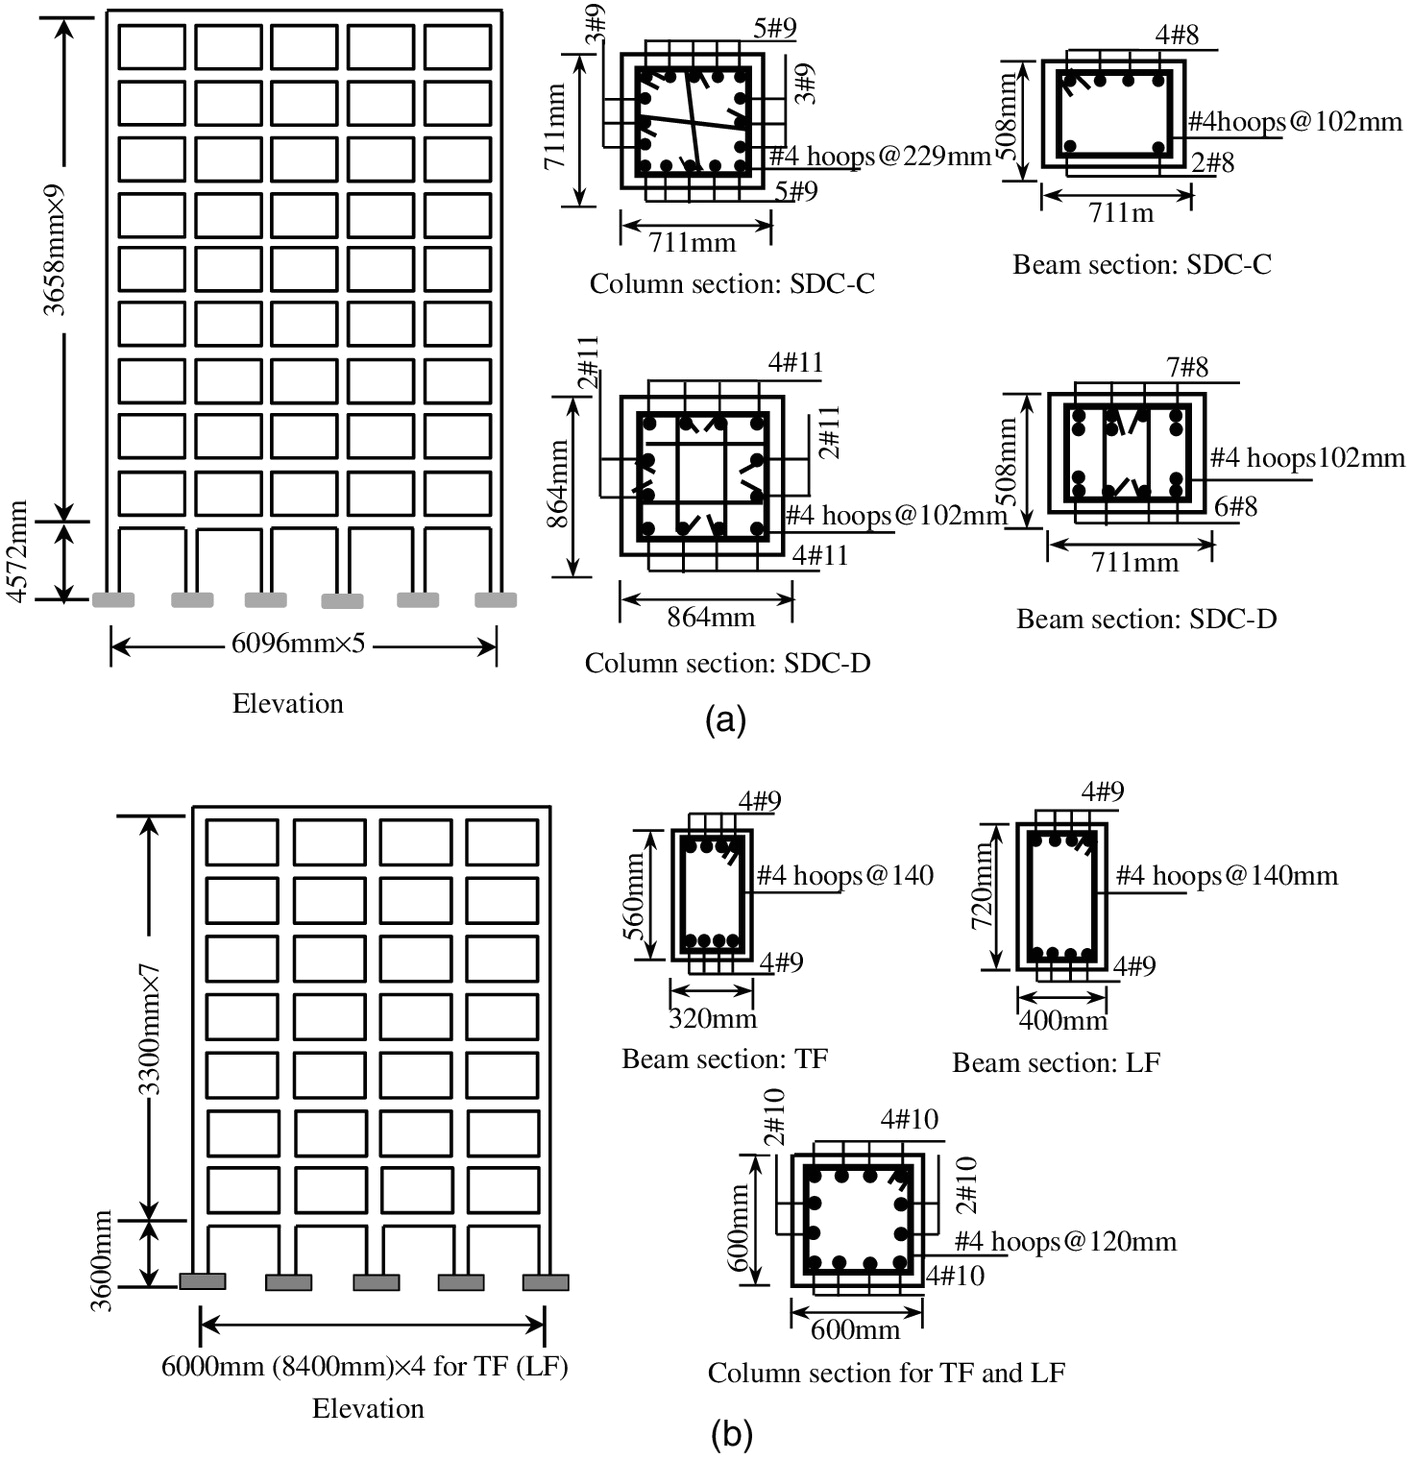 progressive collapse behavior of aging reinforced concrete structures considering corrosion effects journal of performance of constructed facilities vol